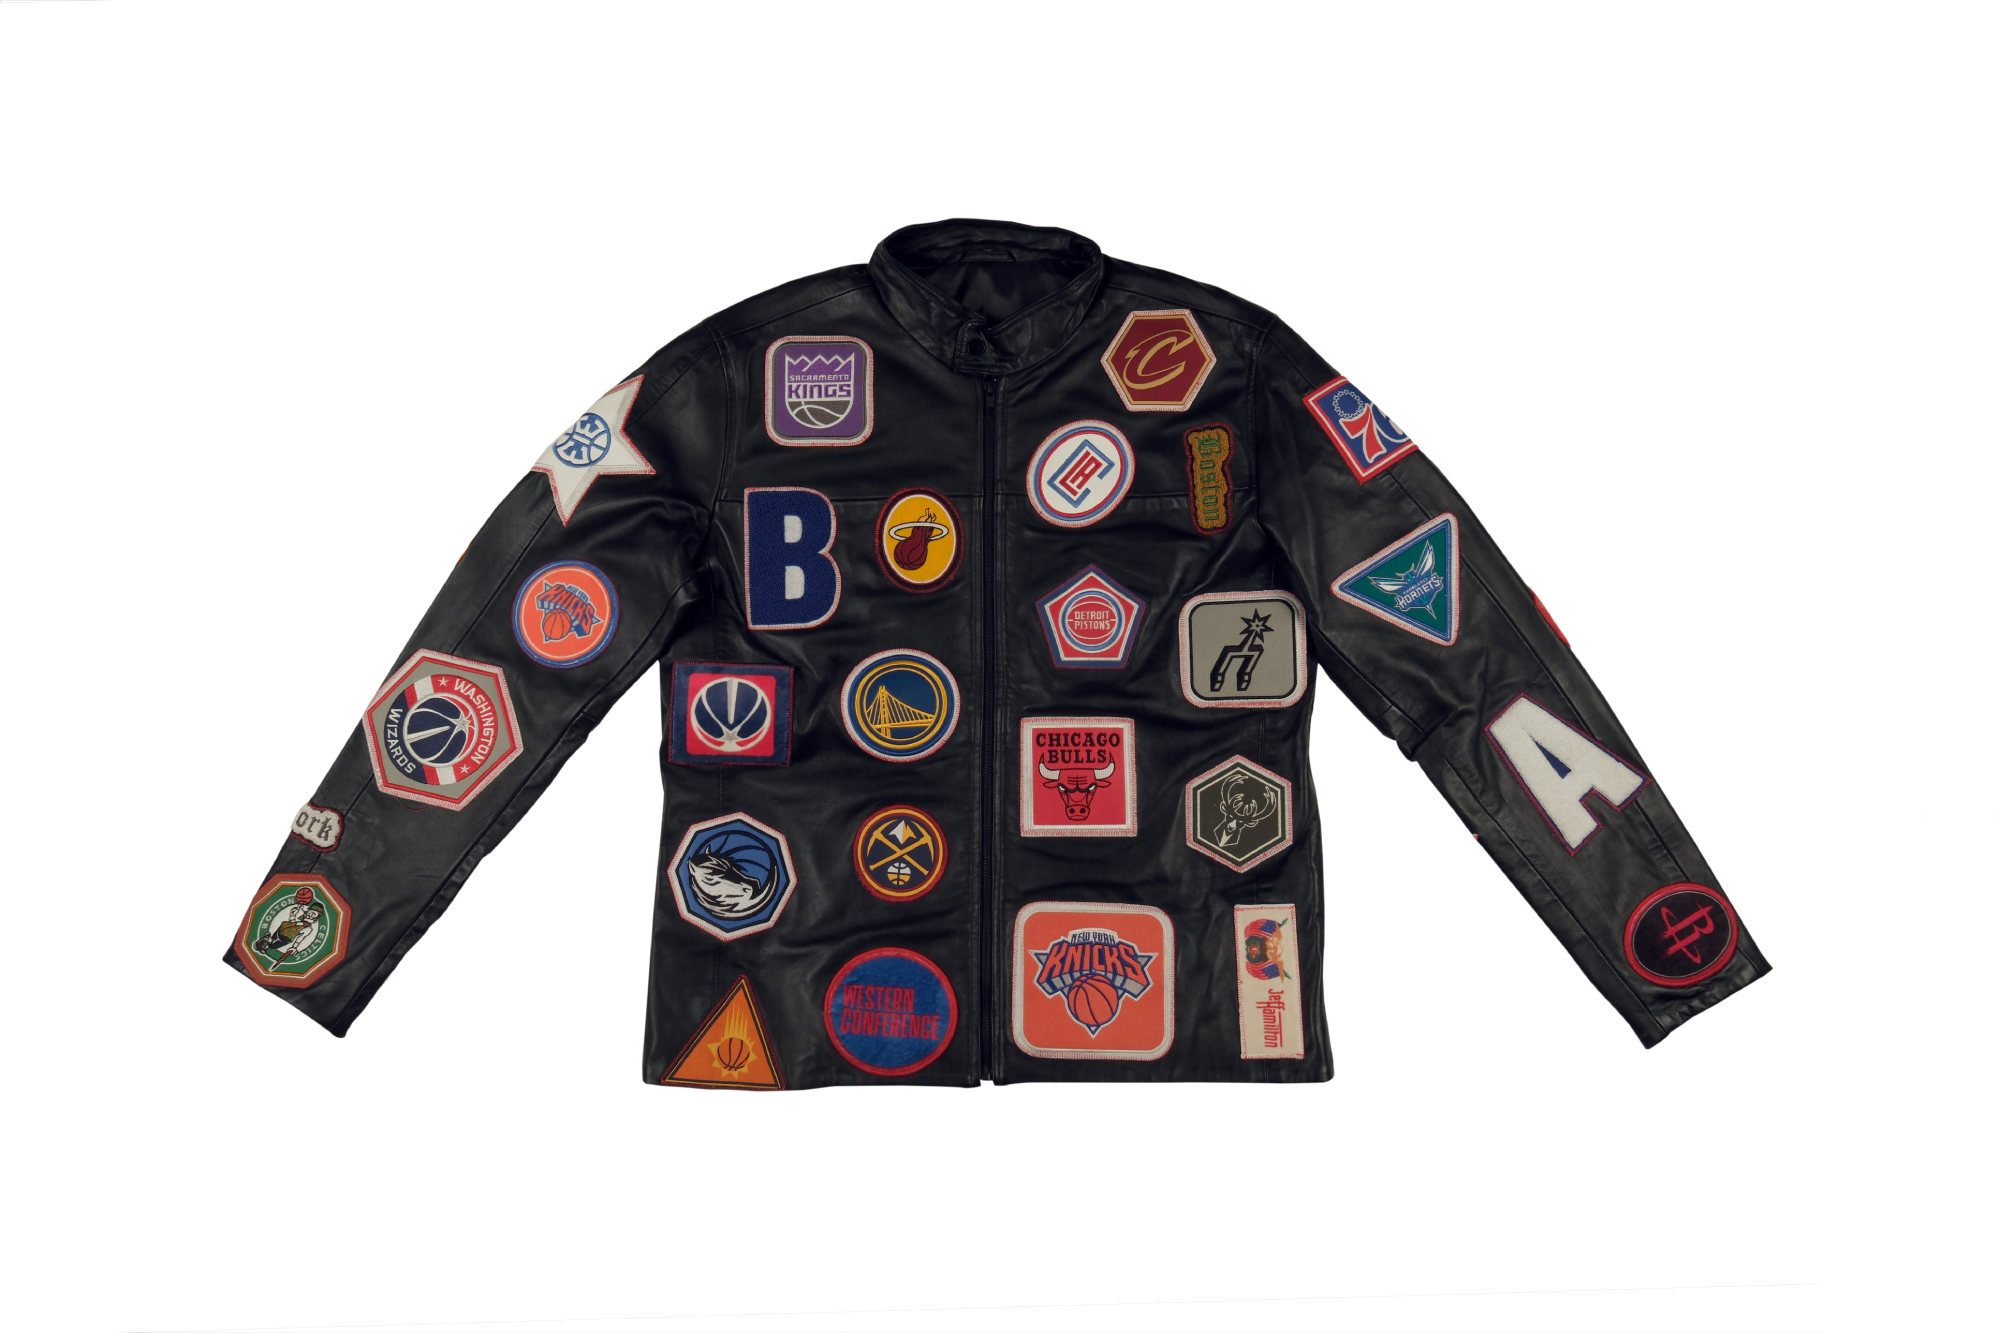 The NBA Legacy Leather Jacket, "Timeless Tribute to All Teams", Limited Edition